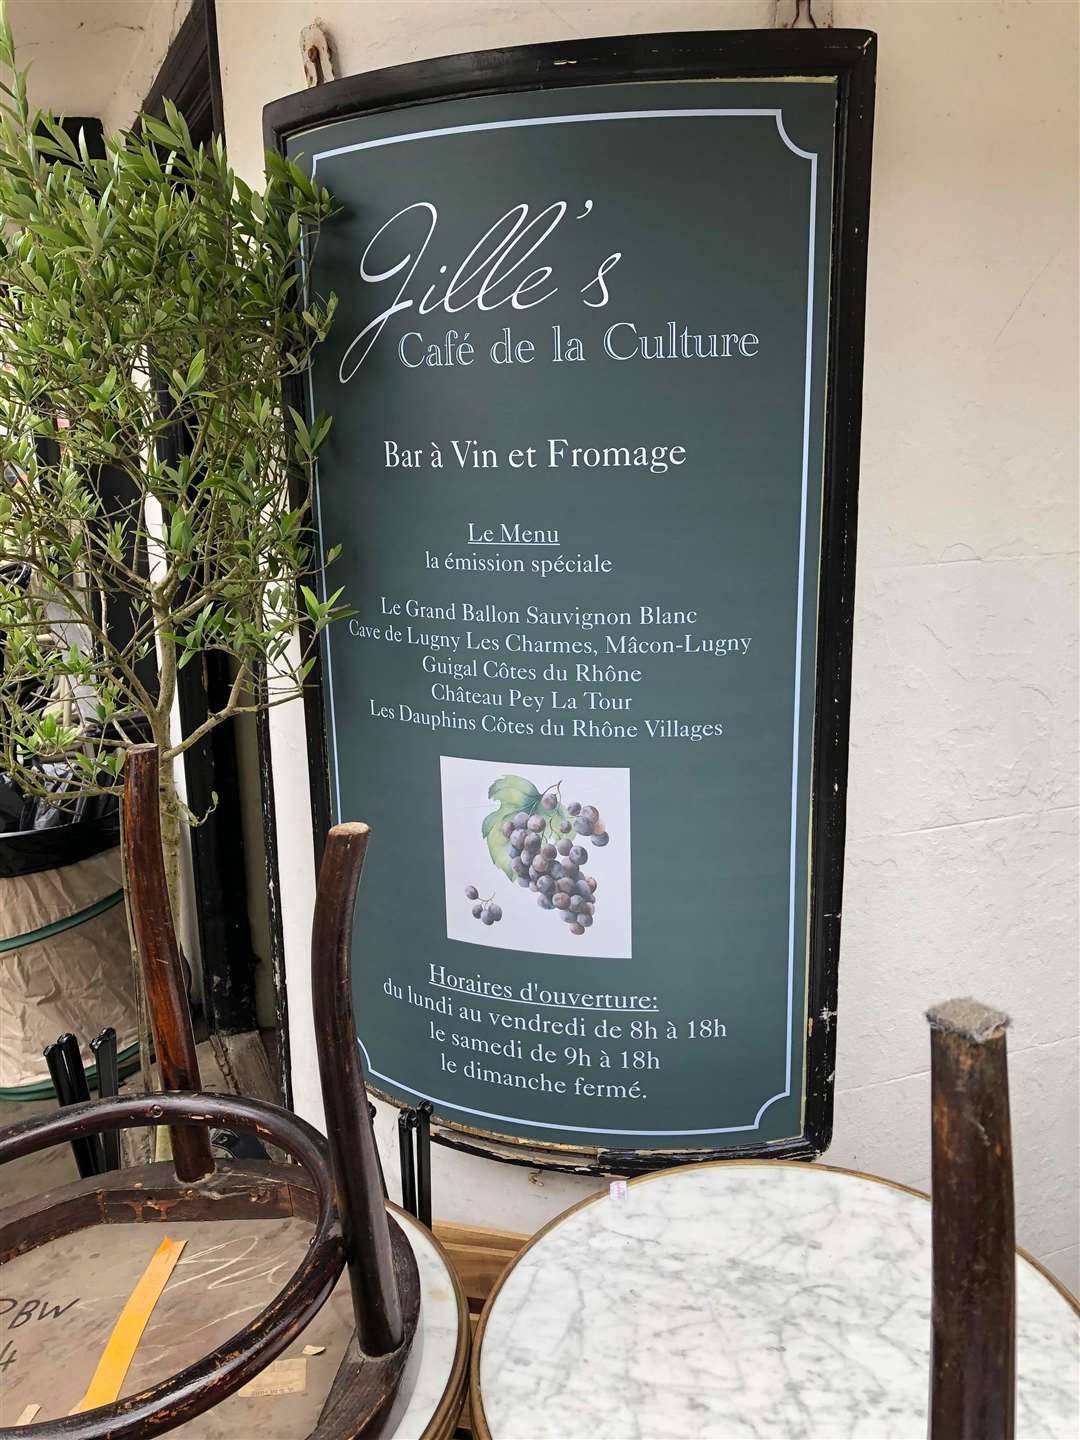 The Fruit Bowl sign has been covered over with a menu for a French restaurant